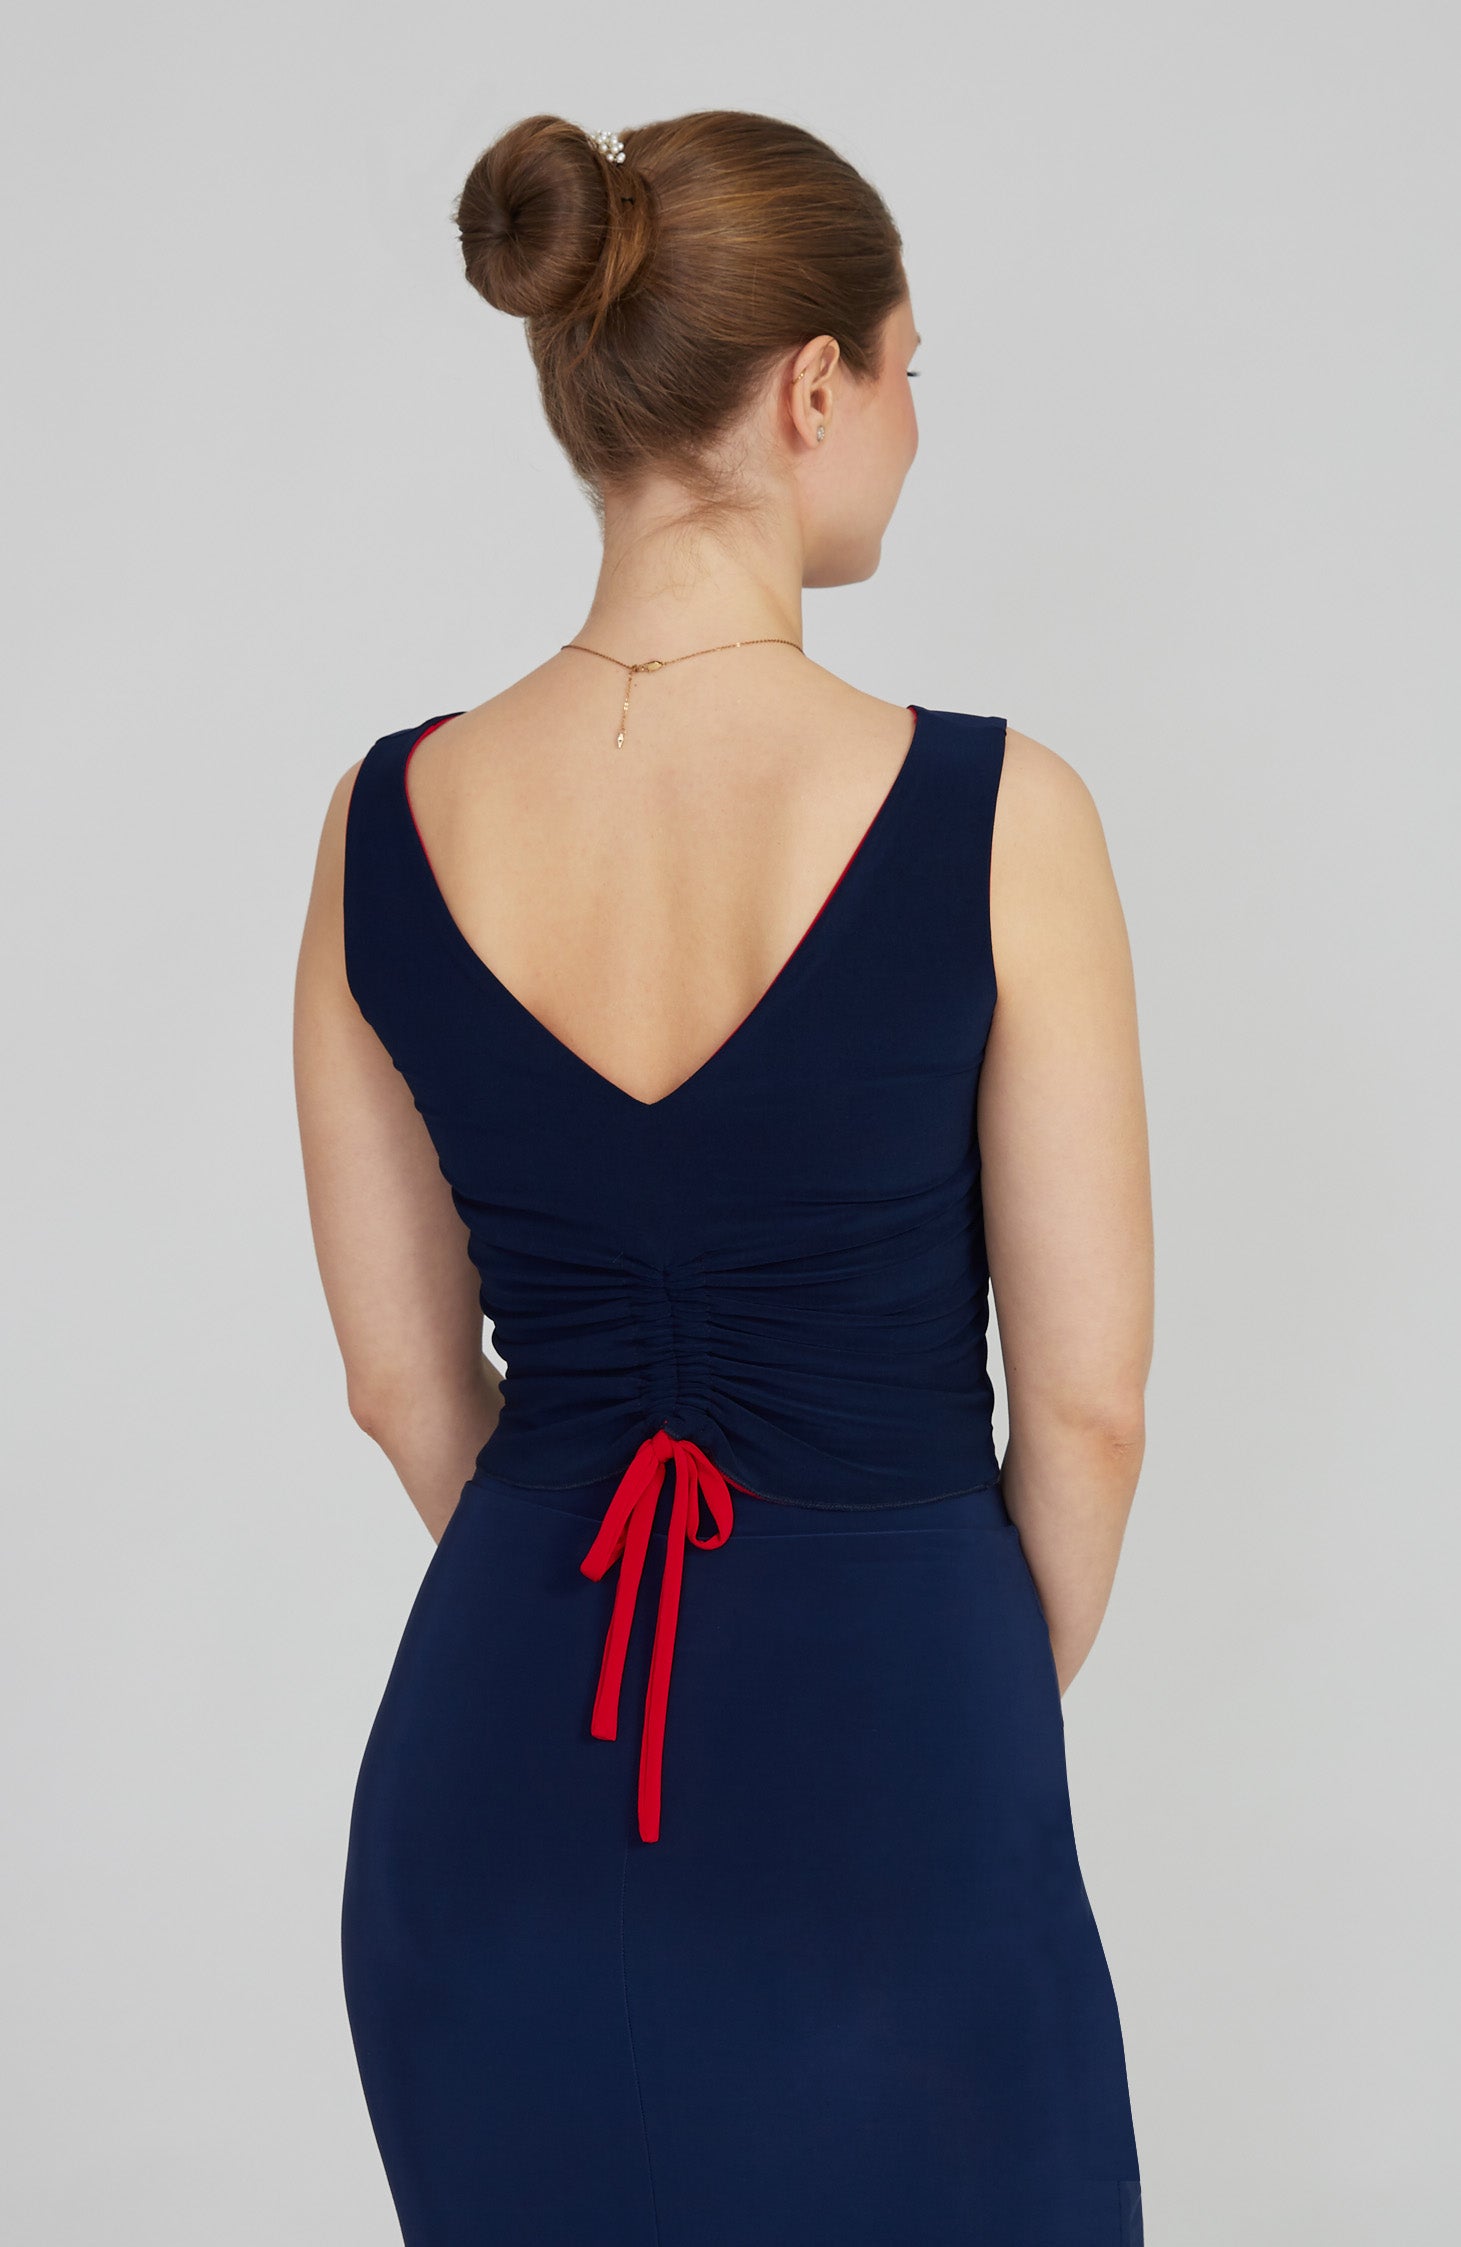 DORA - Reversible Draped Top in Classic Red / Navy Blue